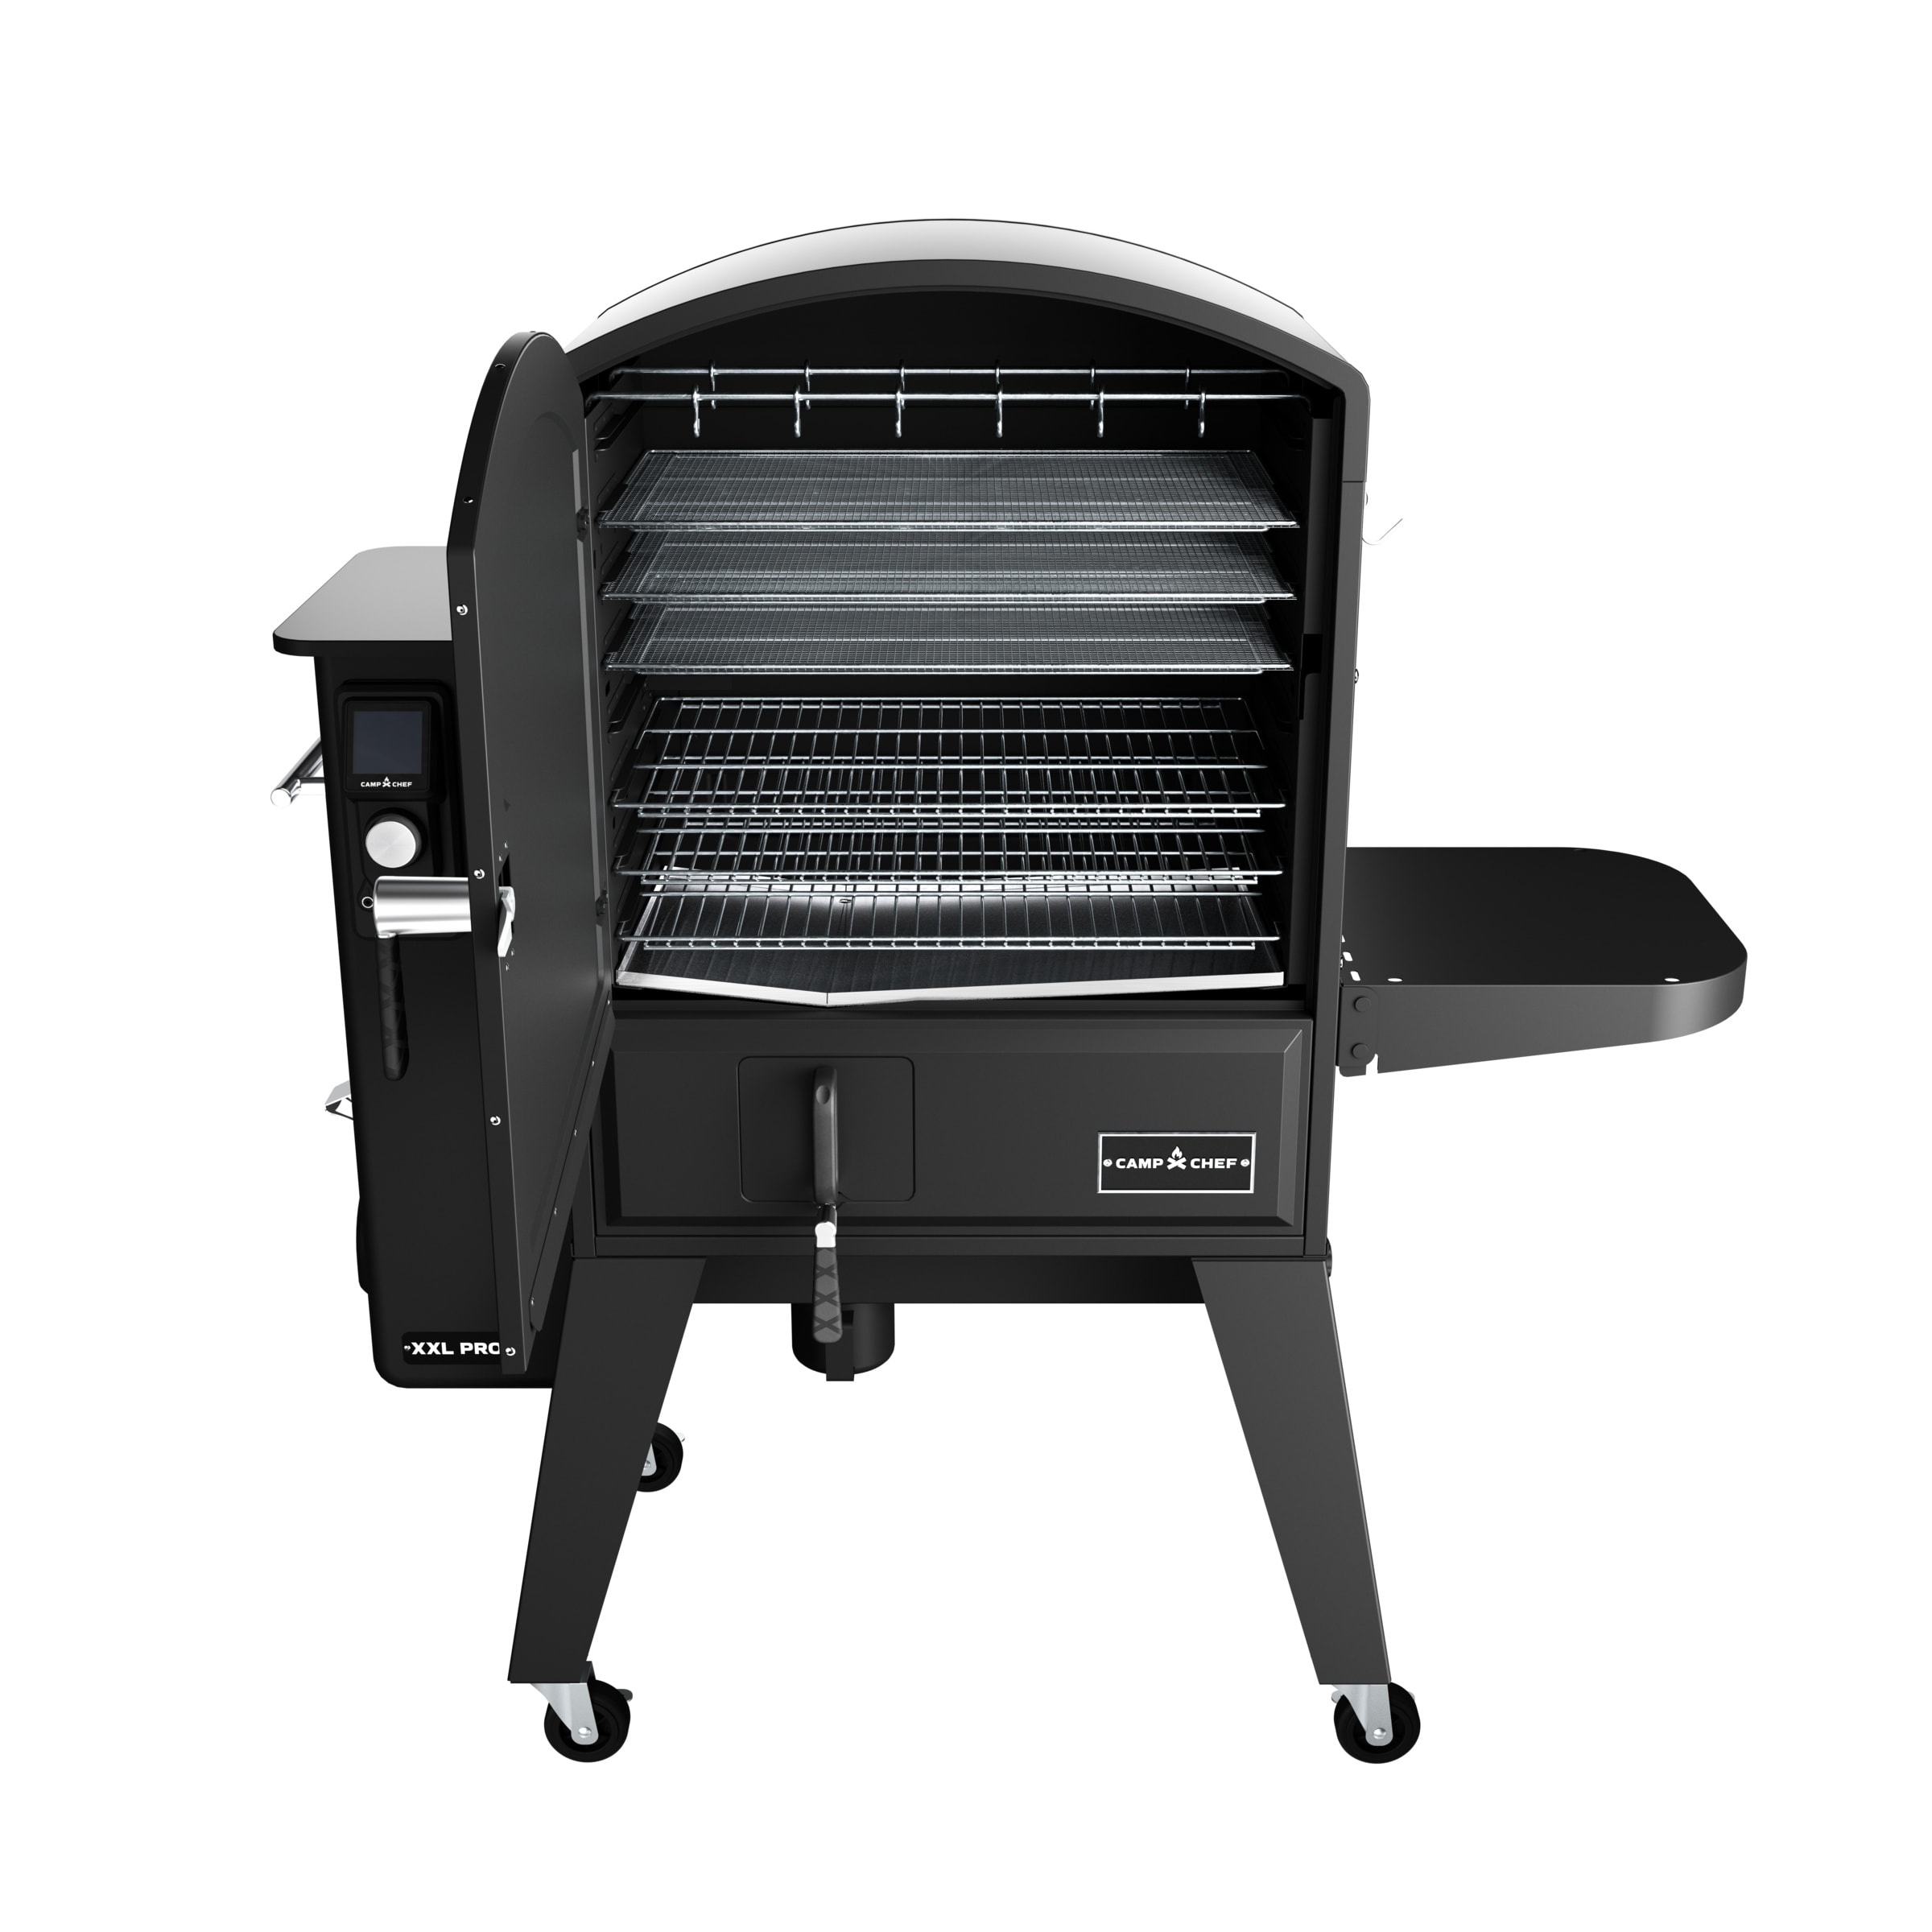 Chef XXL 2408-Sq in Black at Lowes.com